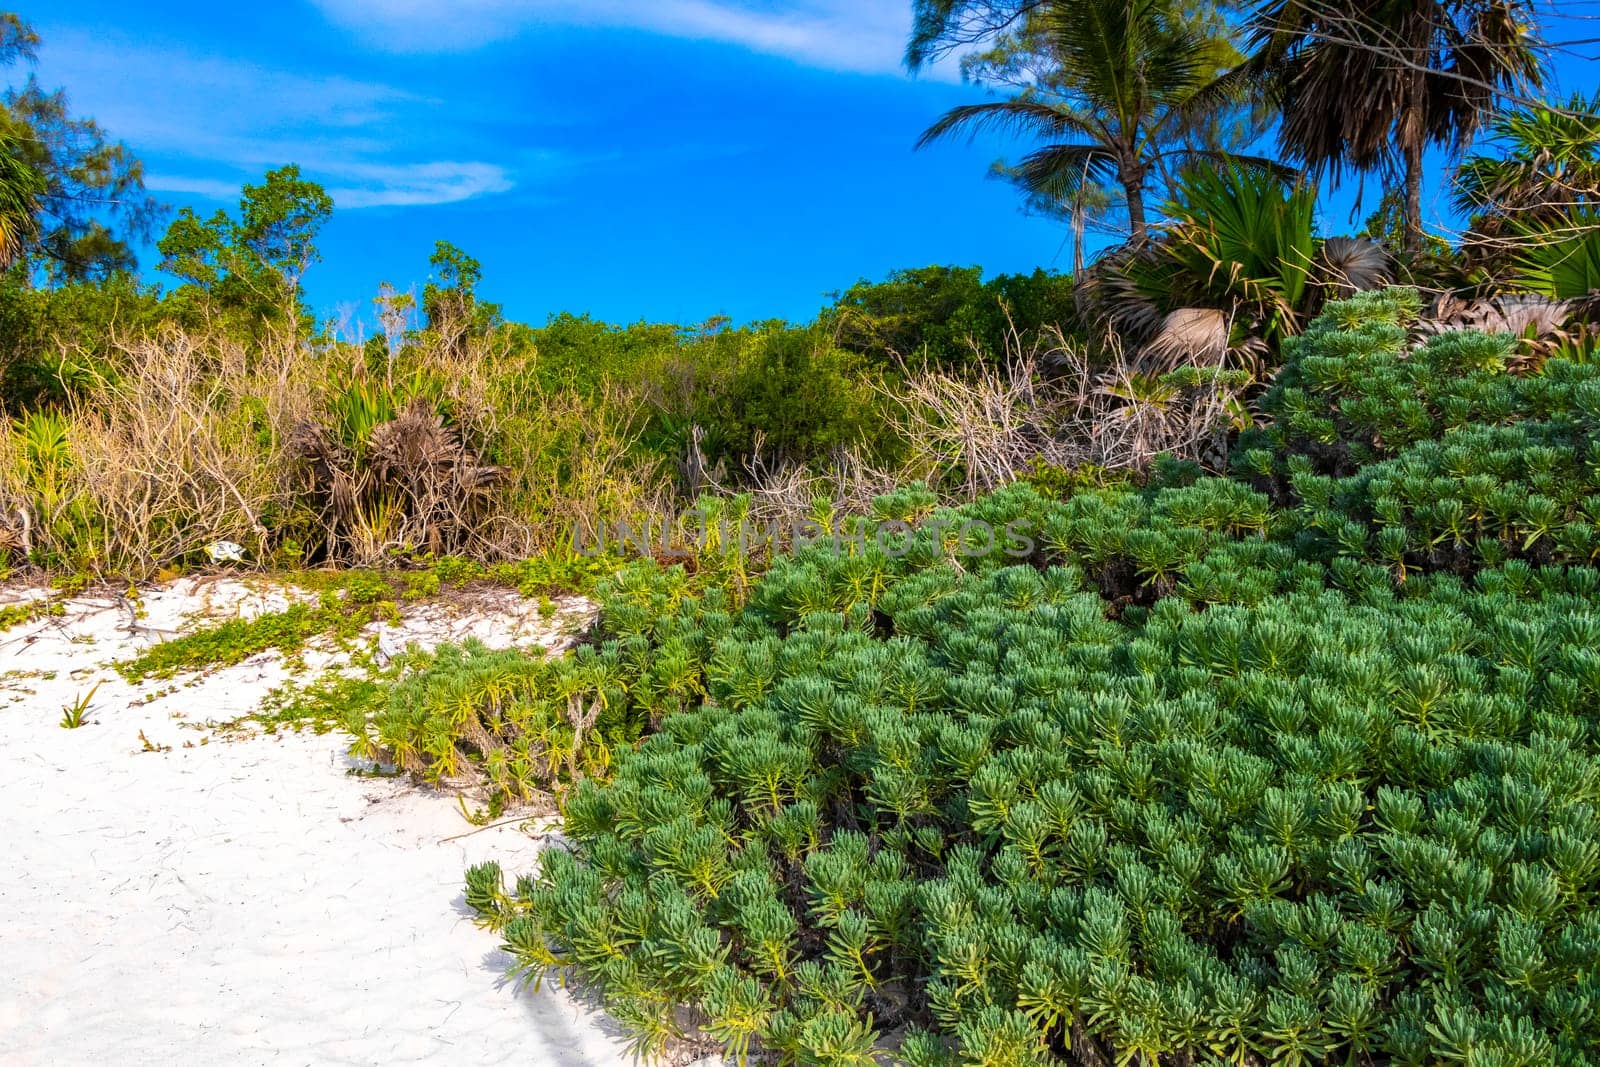 Tropical mexican caribbean beach nature with plants palm trees and fir trees in jungle forest nature with  blue sky and beach sand in Playa del Carmen Quintana Roo Mexico.